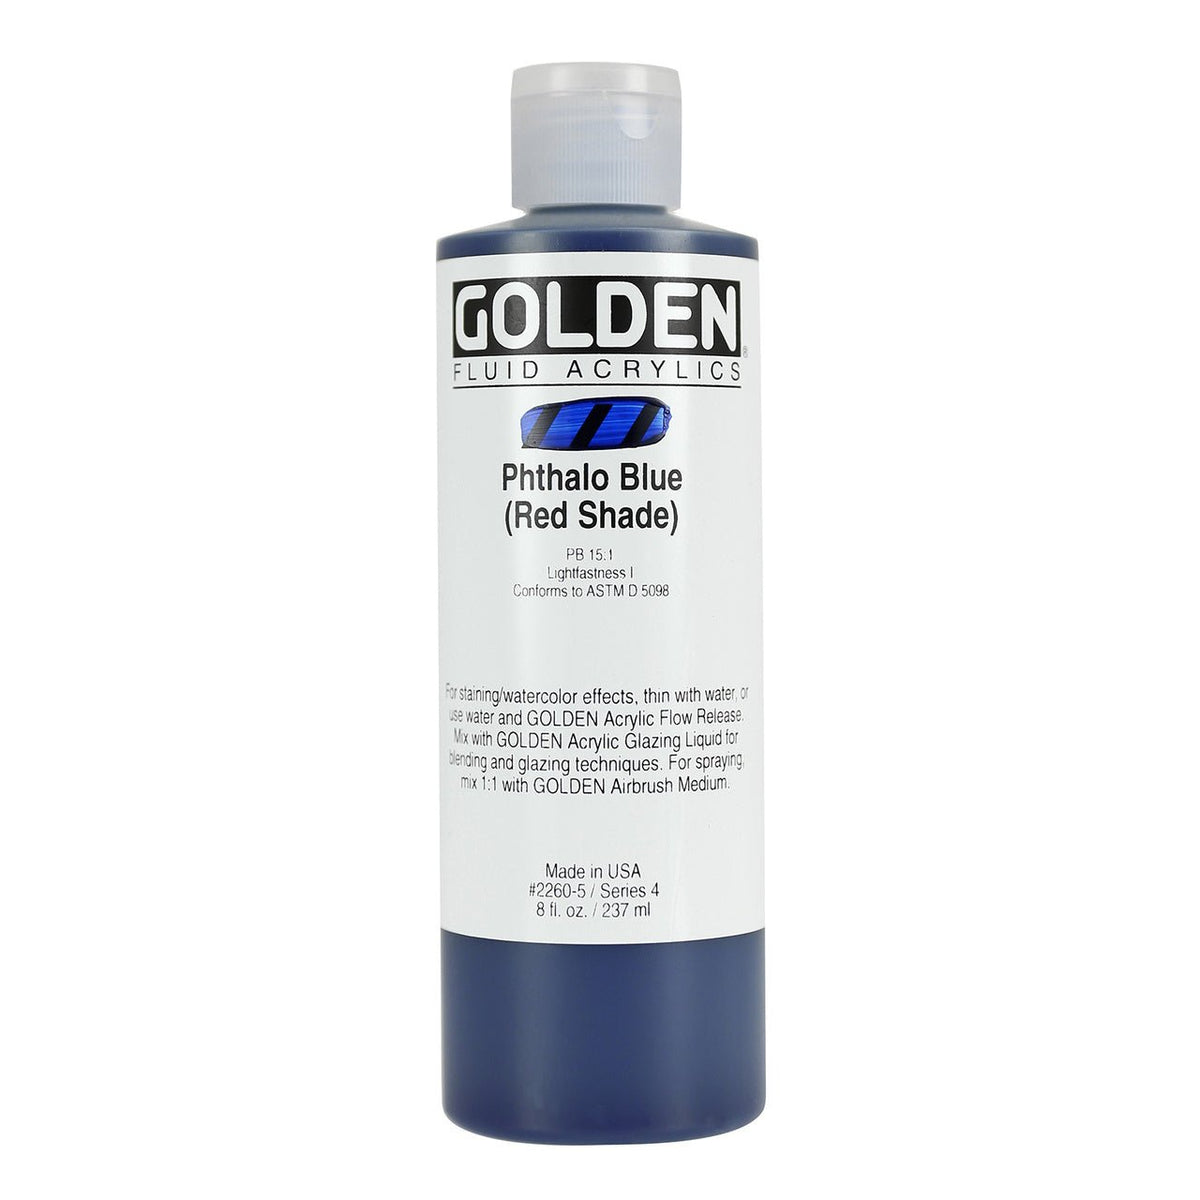 Golden Fluid Acrylic Phthalo Blue (red shade) 8 oz - merriartist.com